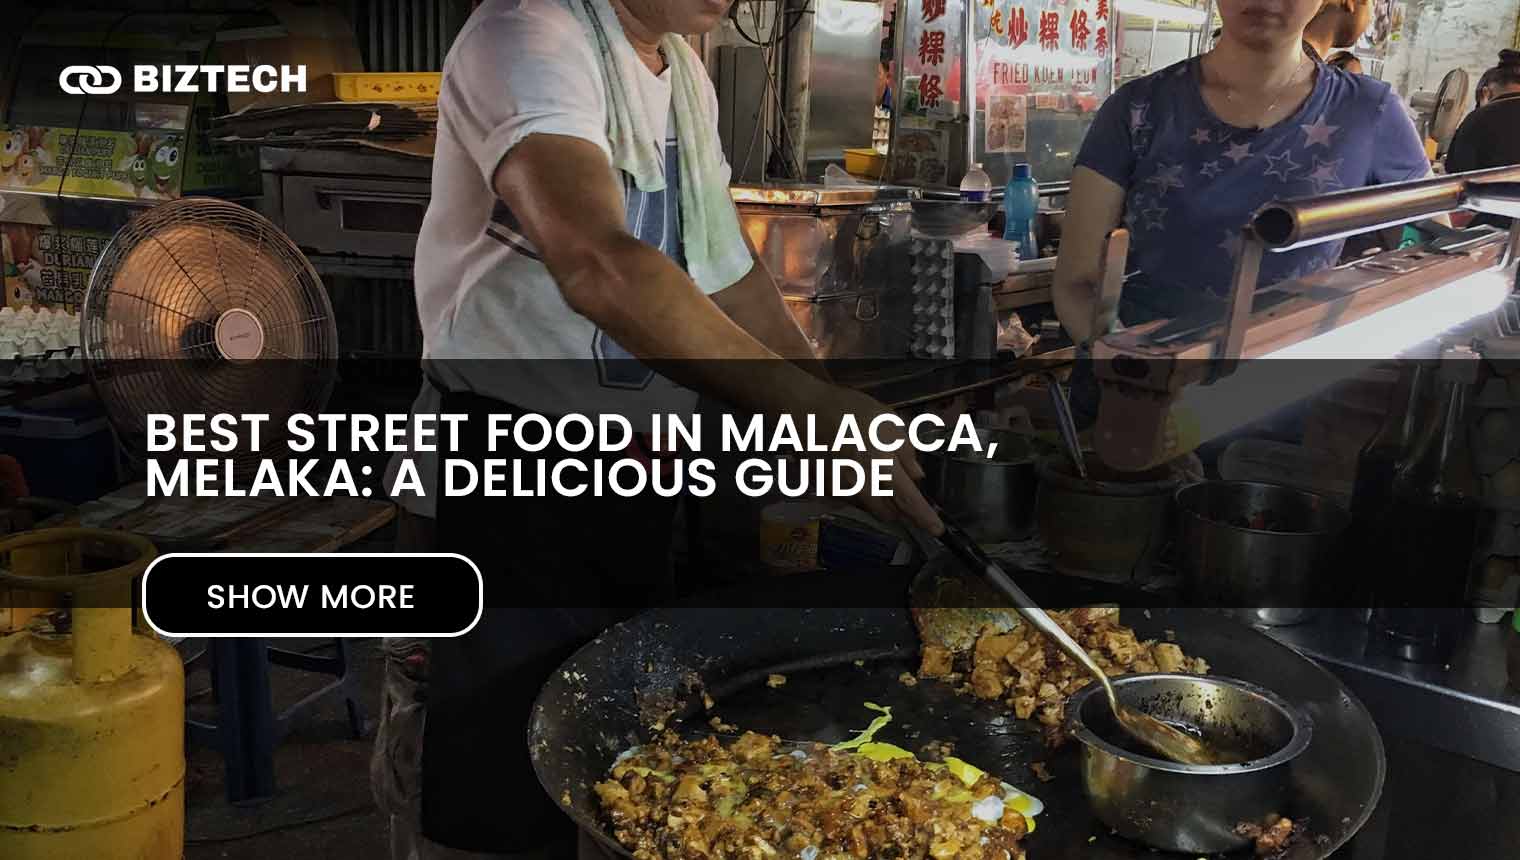 Best Street Food in Malacca, Melaka: A Delicious Guide